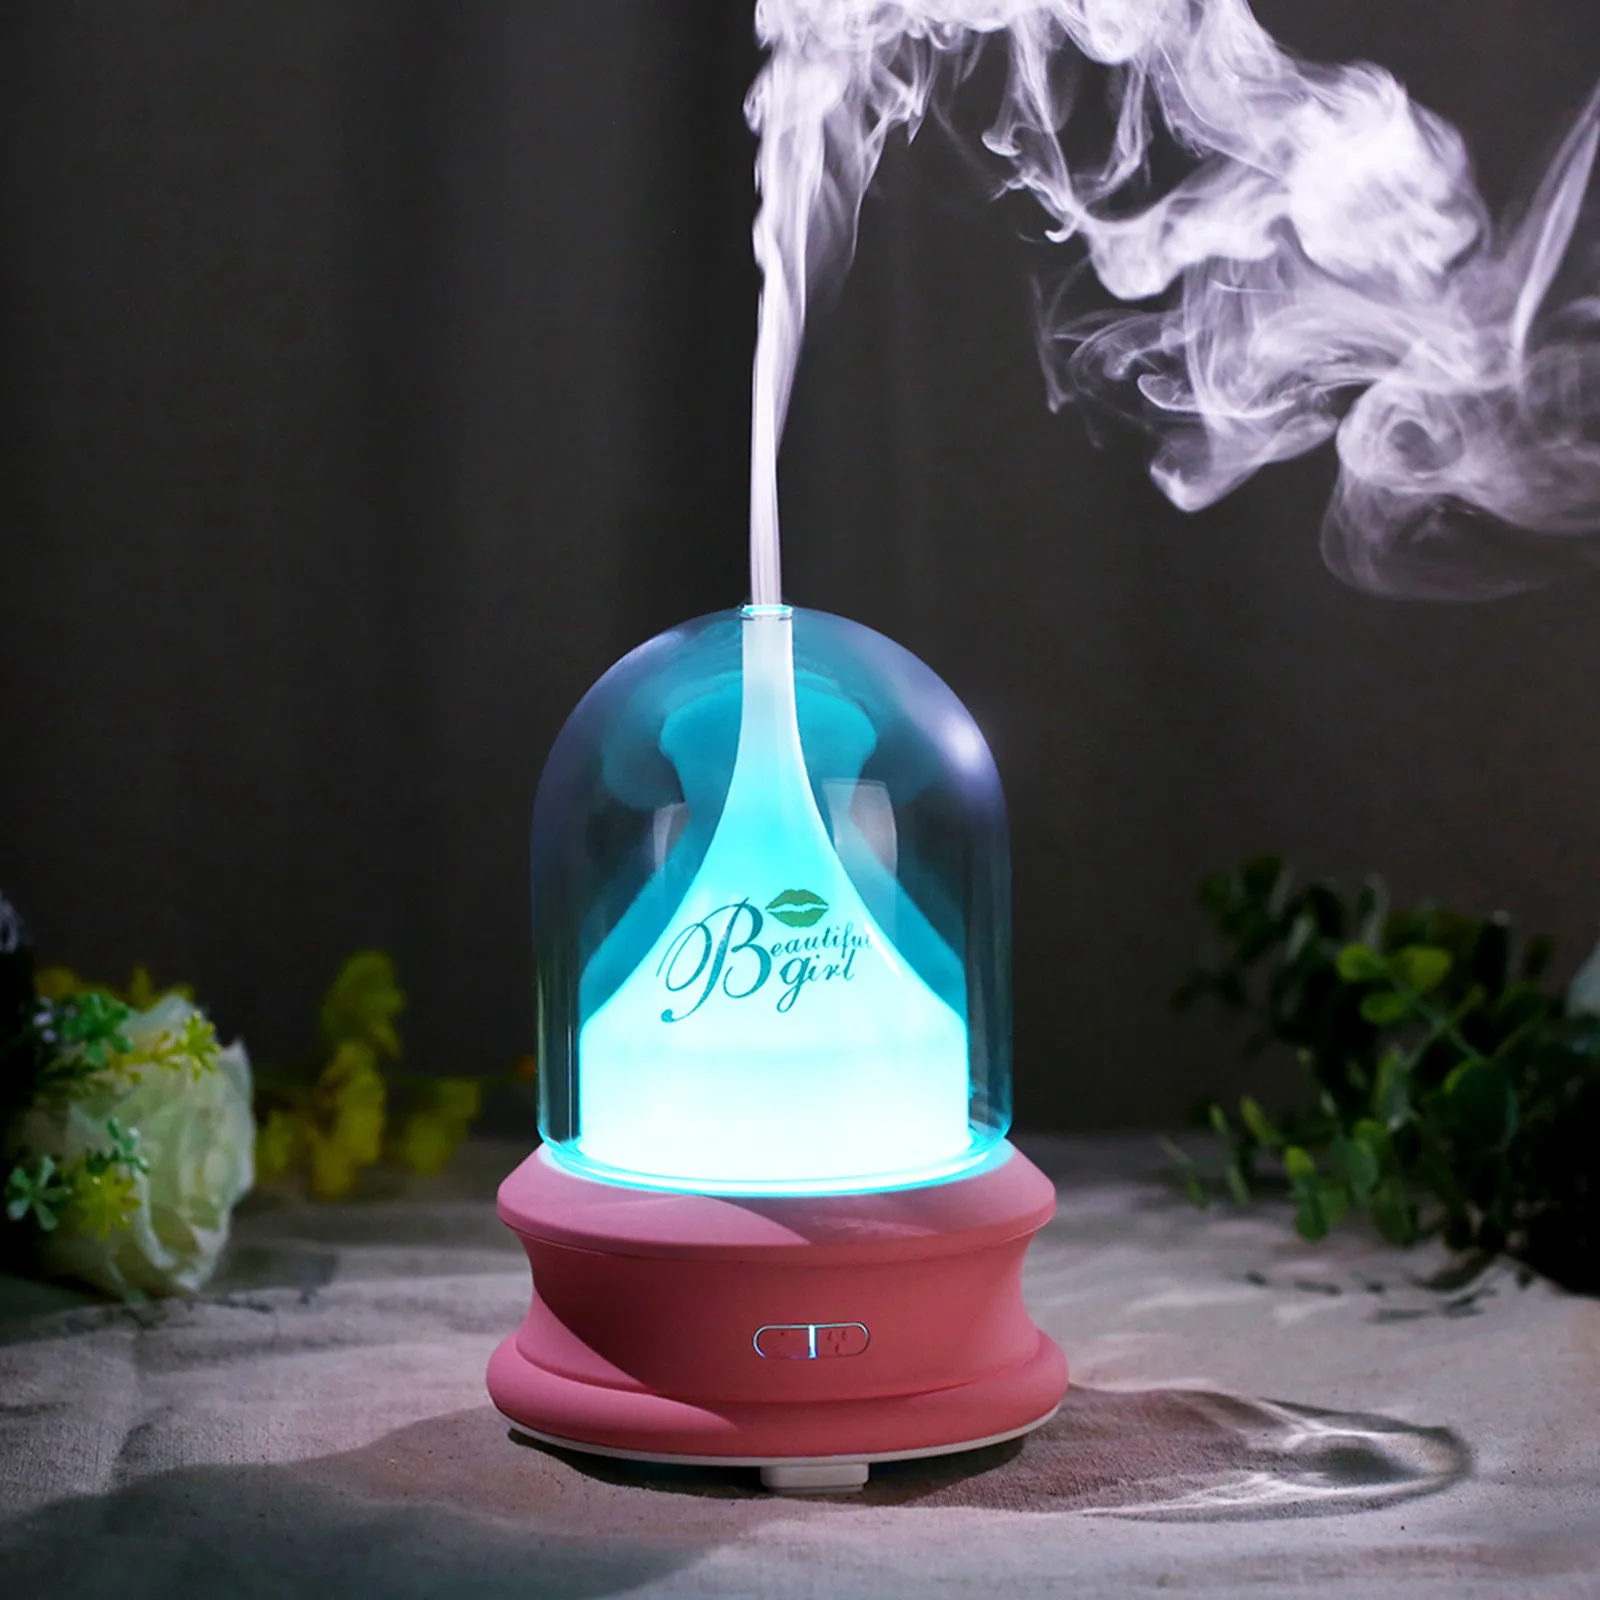 

Mini Portable Ultrasonic Air Humidifer Aroma Essential Oil Diffuser USB Mist Maker Aromatherapy Humidifiers with Colorful Light